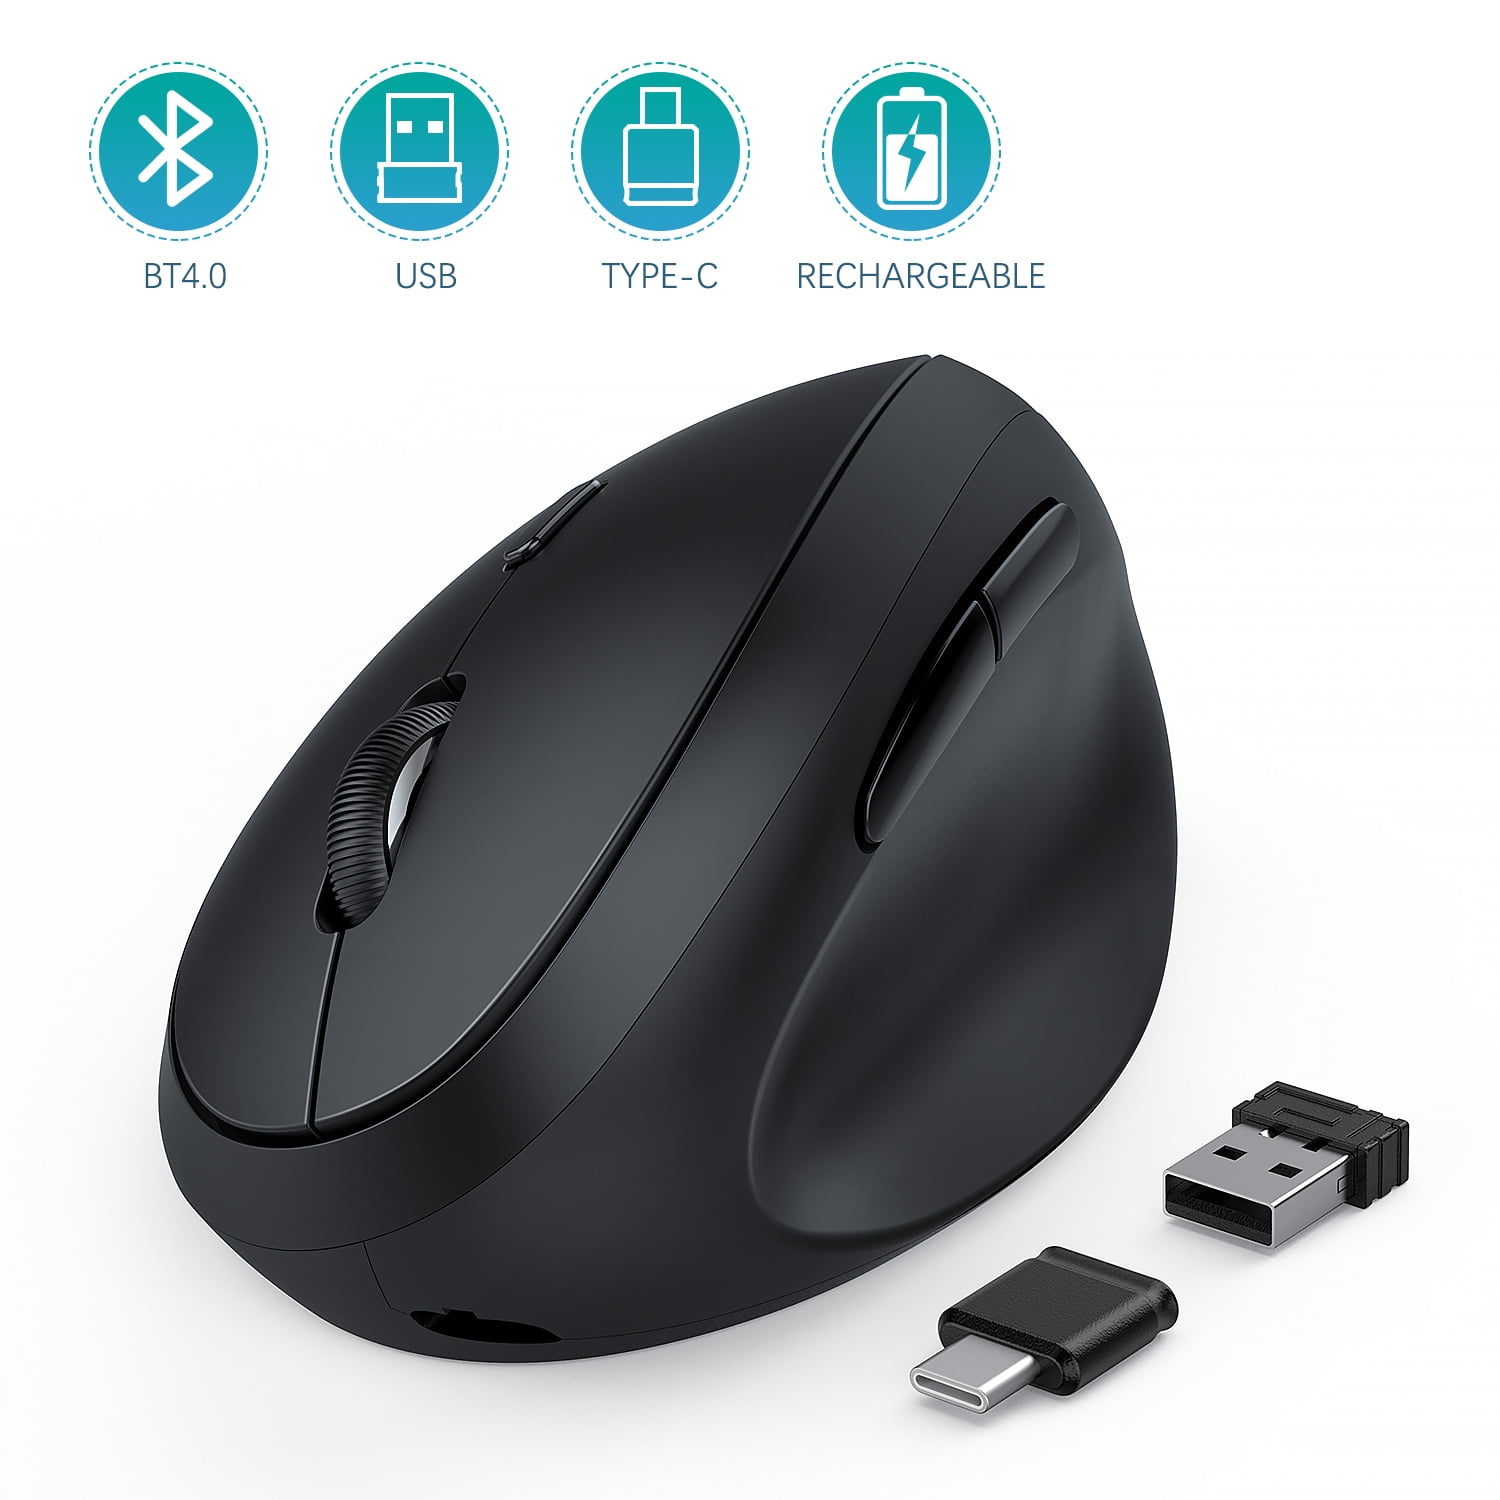 MODAO 2.4GHZ Type-C Wireless Mouse USB Gaming Mice For Macbook/ Pro USB Devices 